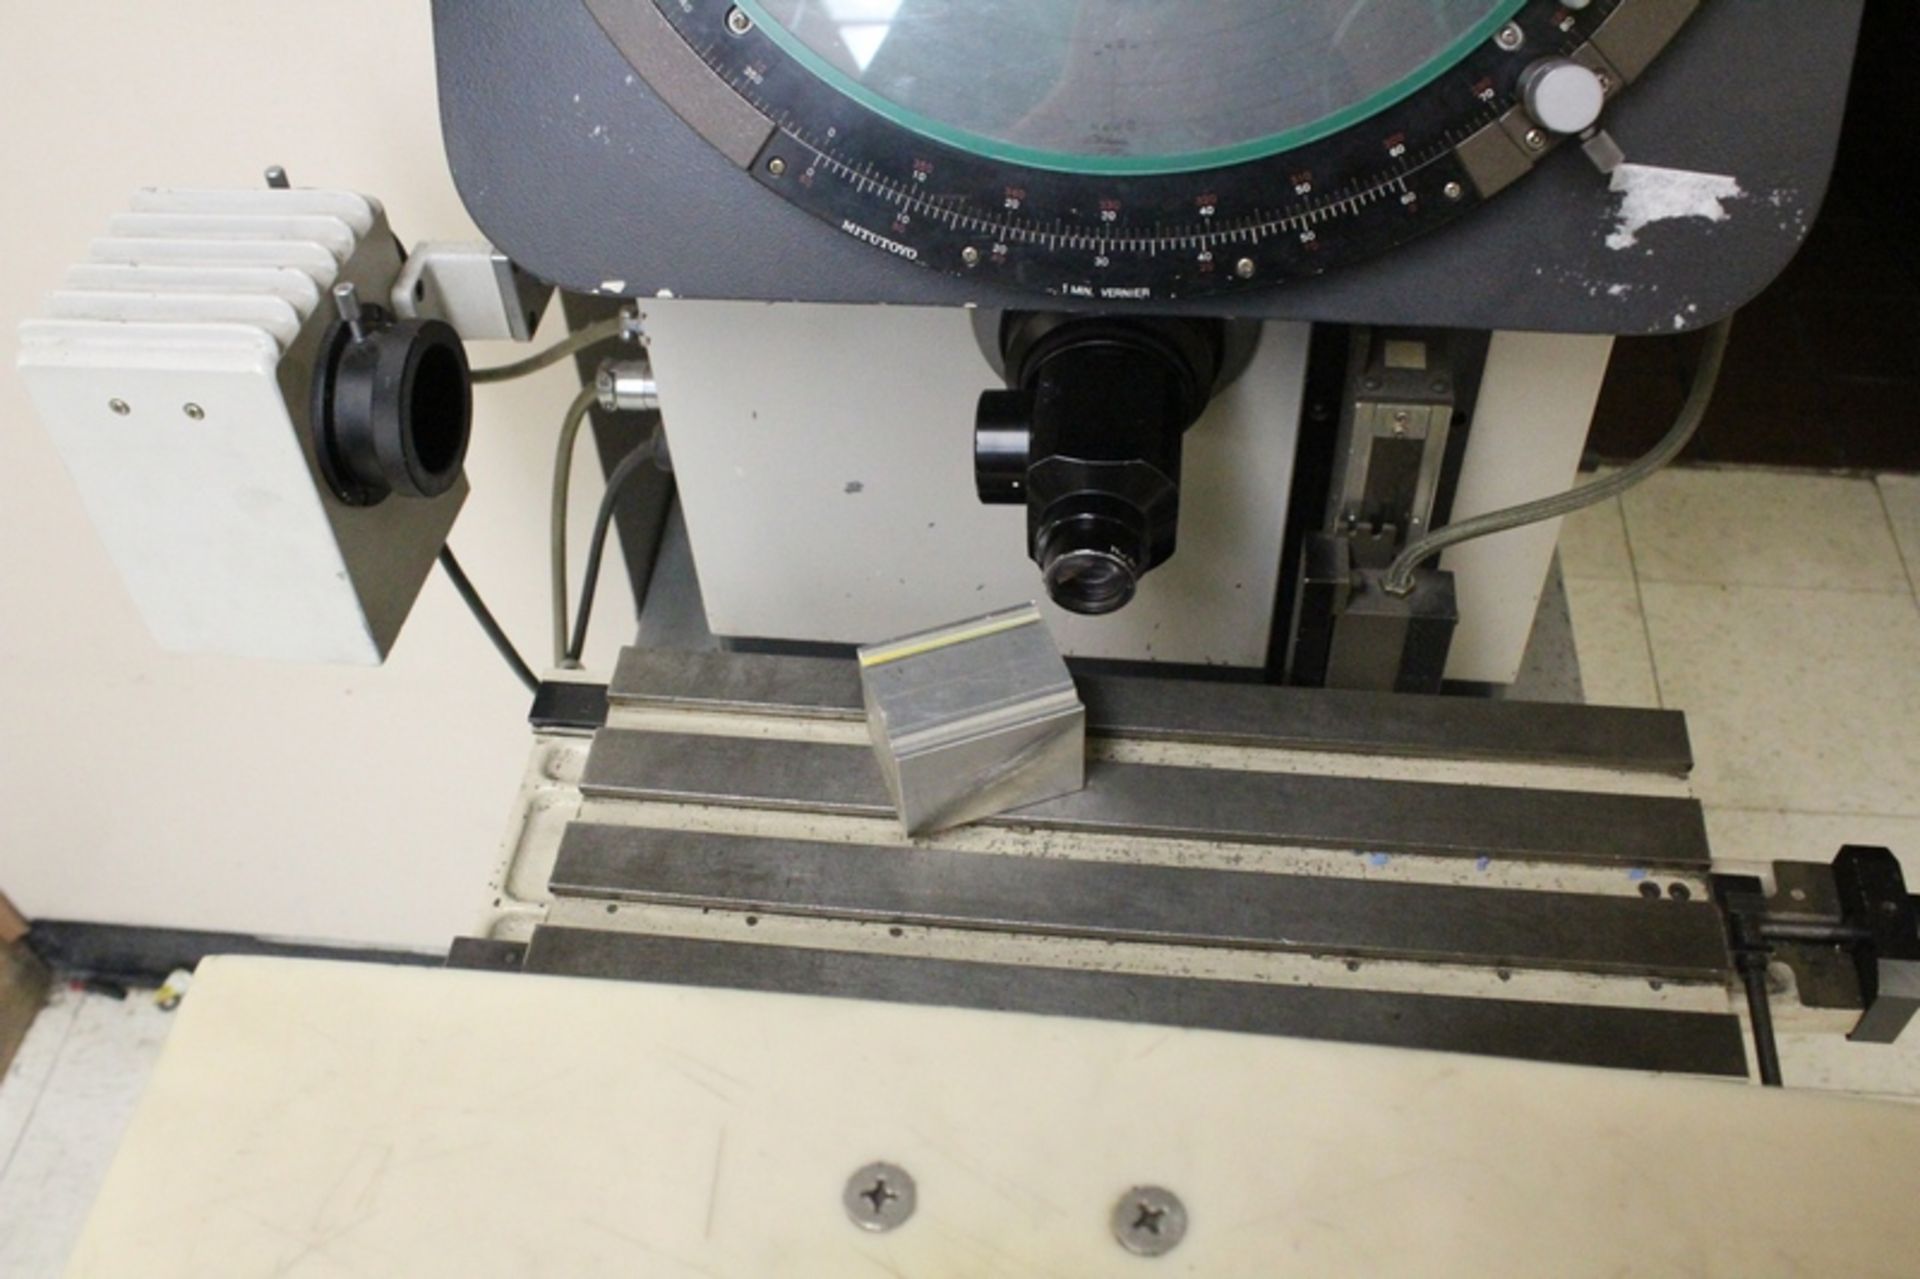 MITUTOYO 13” TYPE PH-350 OPTICAL COMPARATOR, S/N 10664, WITH MITUTOYO 2-AXIS DIGITAL READOUT, - Image 4 of 5